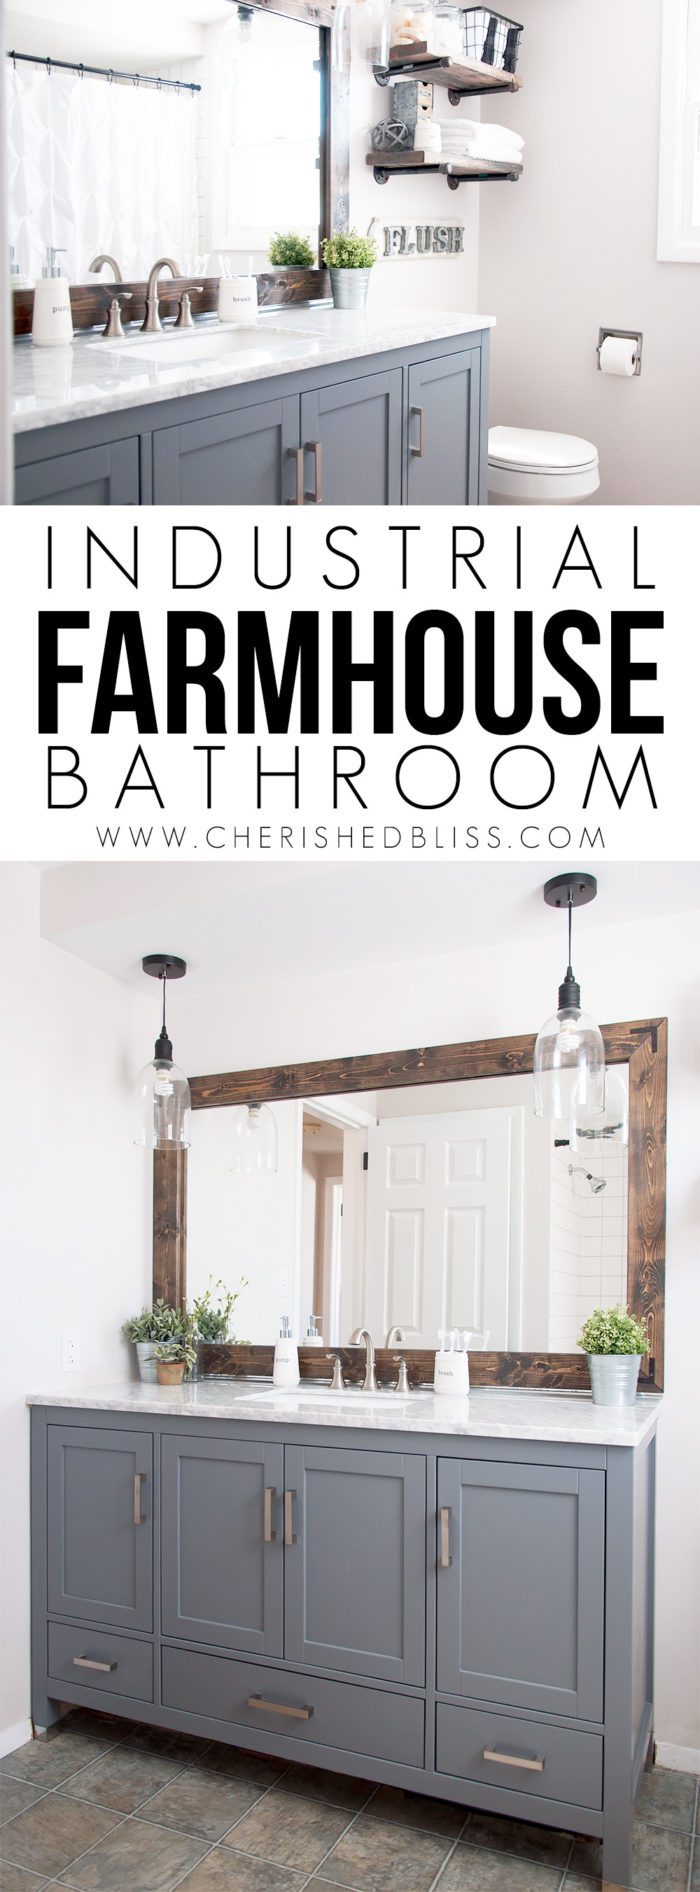 This Industrial Farmhouse Bathroom is the perfect blend of styles and creates such a cozy atmosphere! 